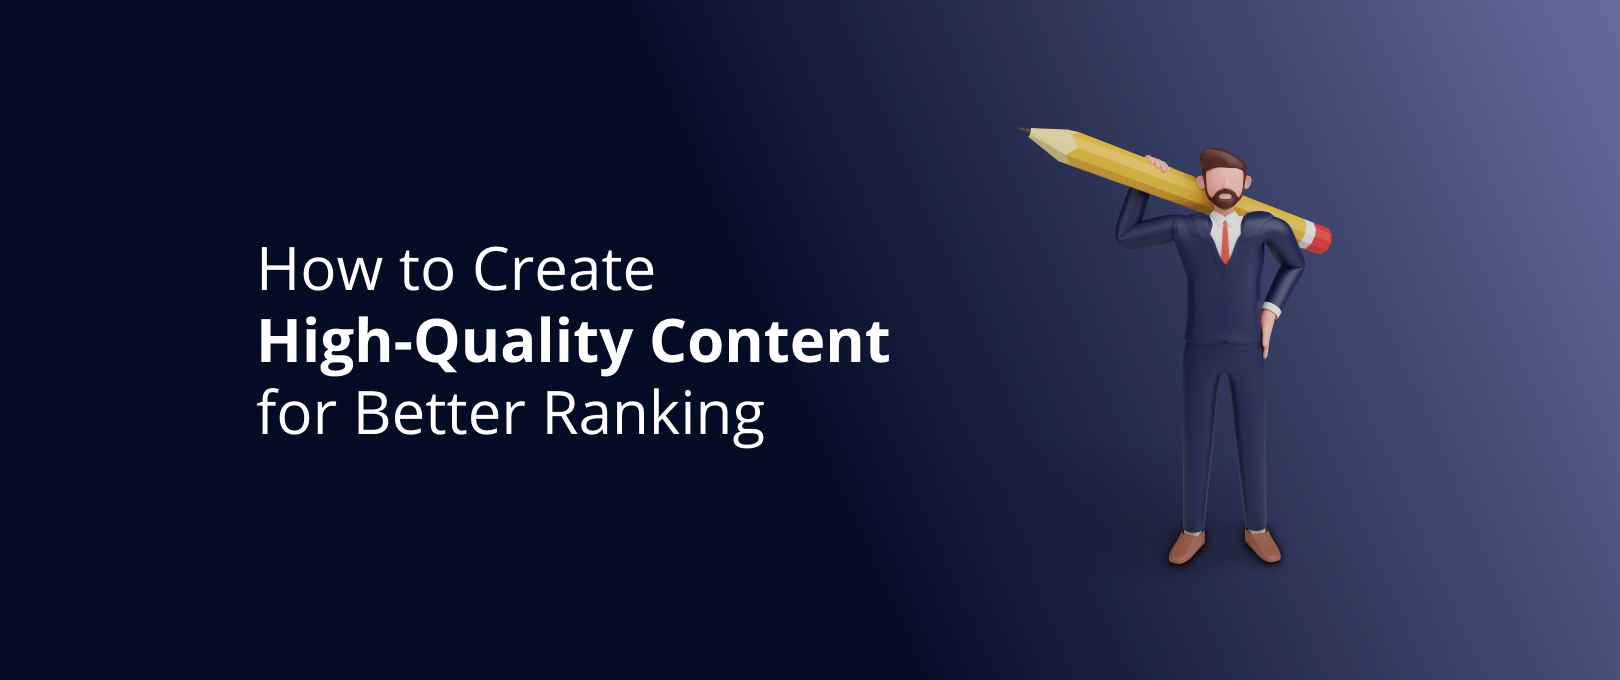 How to Create High-Quality Content for Better Ranking - DevriX